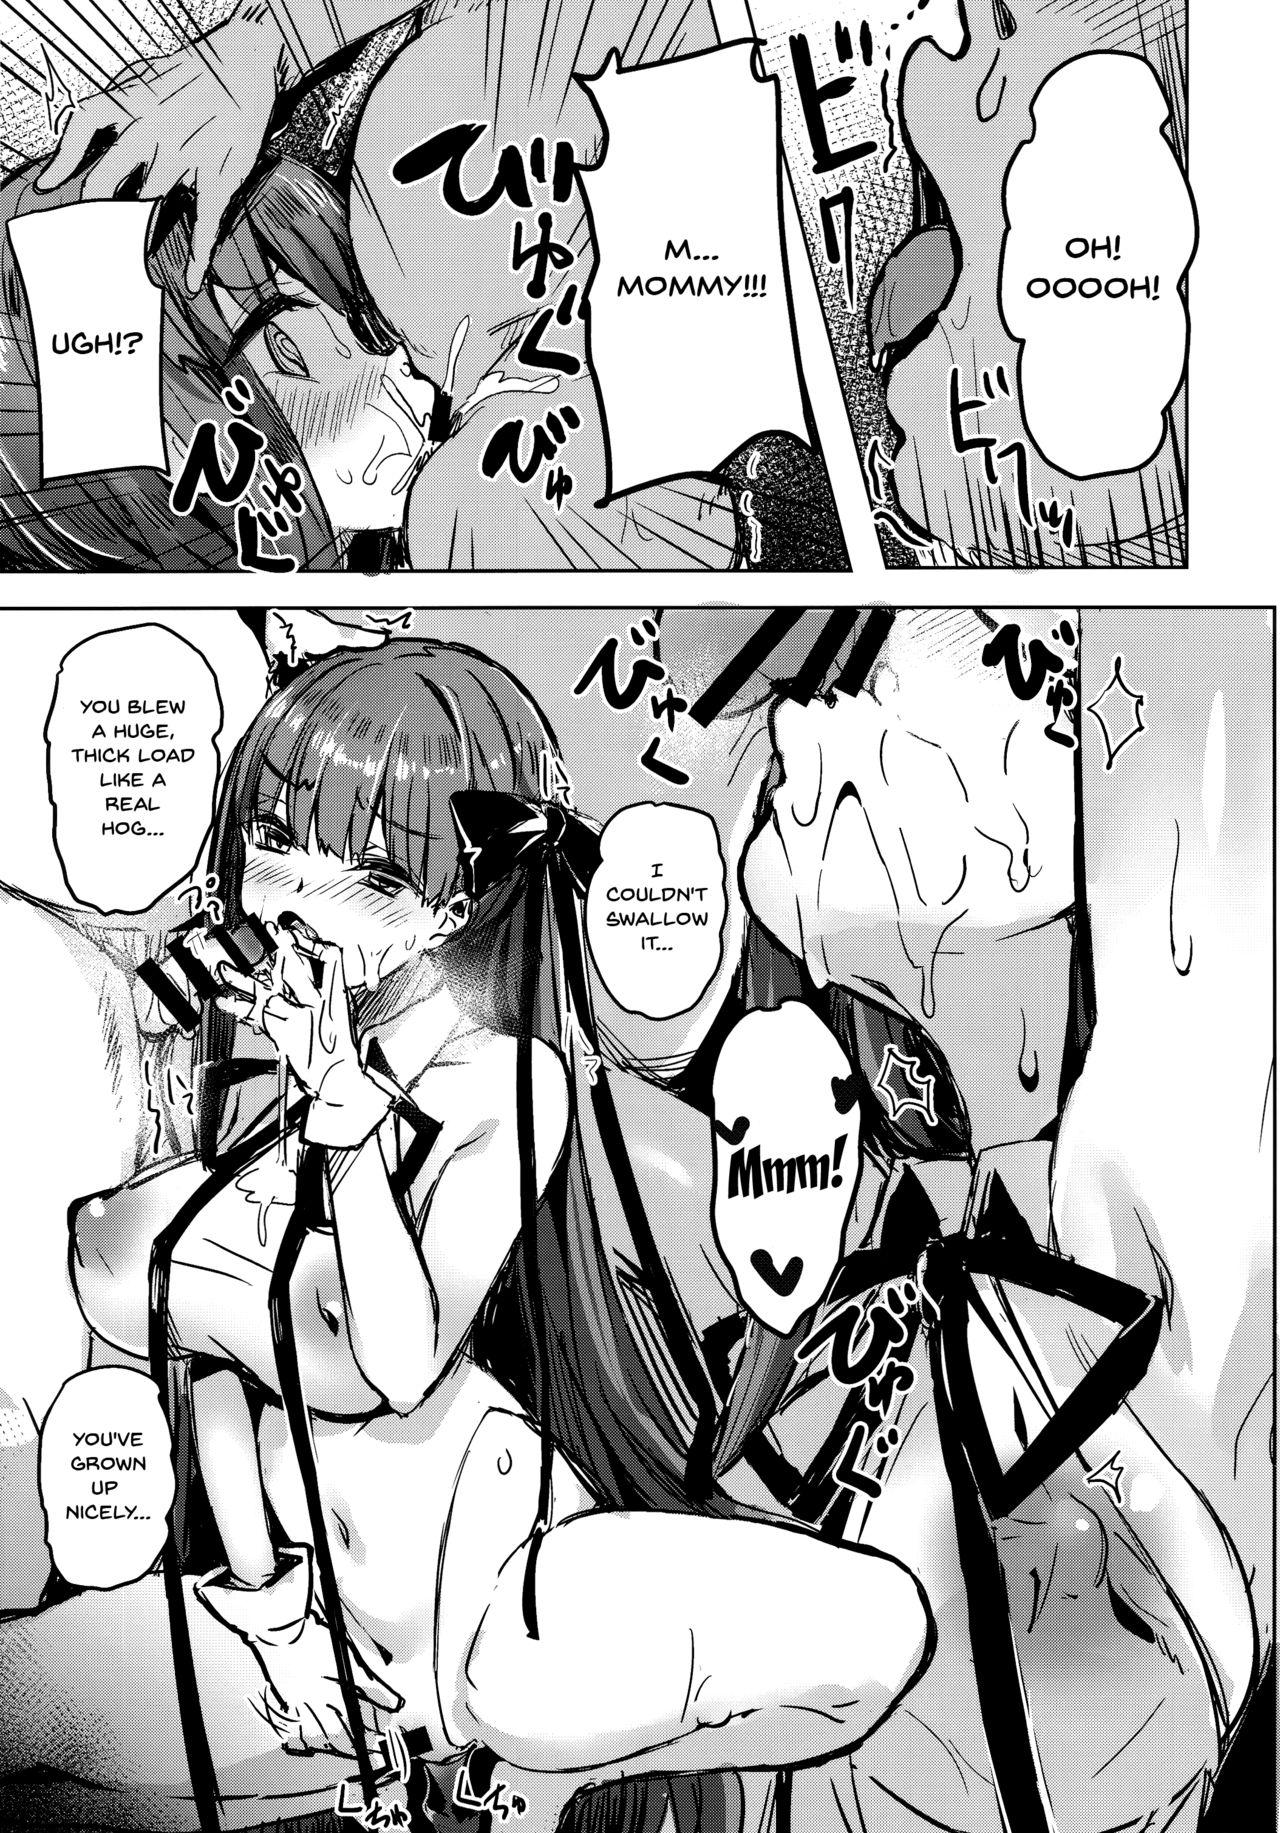 Assfingering BB mama to ko buta-san | Mommy BB and Little Piggy - Fate grand order Asses - Page 10